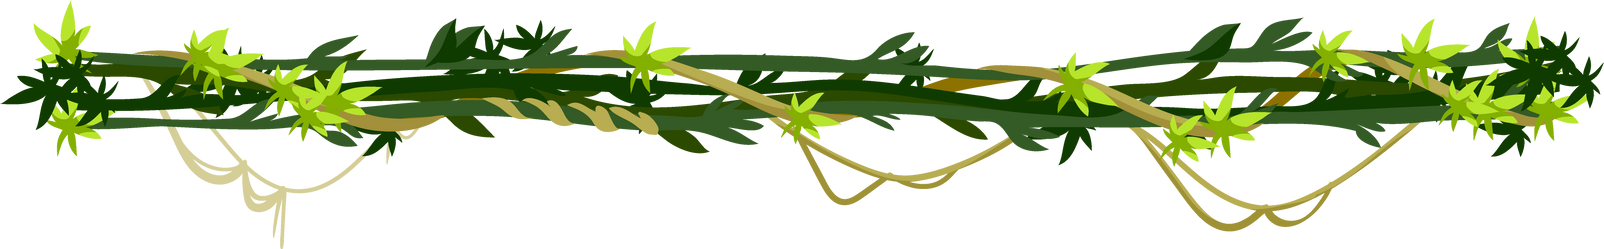 Rainforest liana plant, exotic leaves on branch